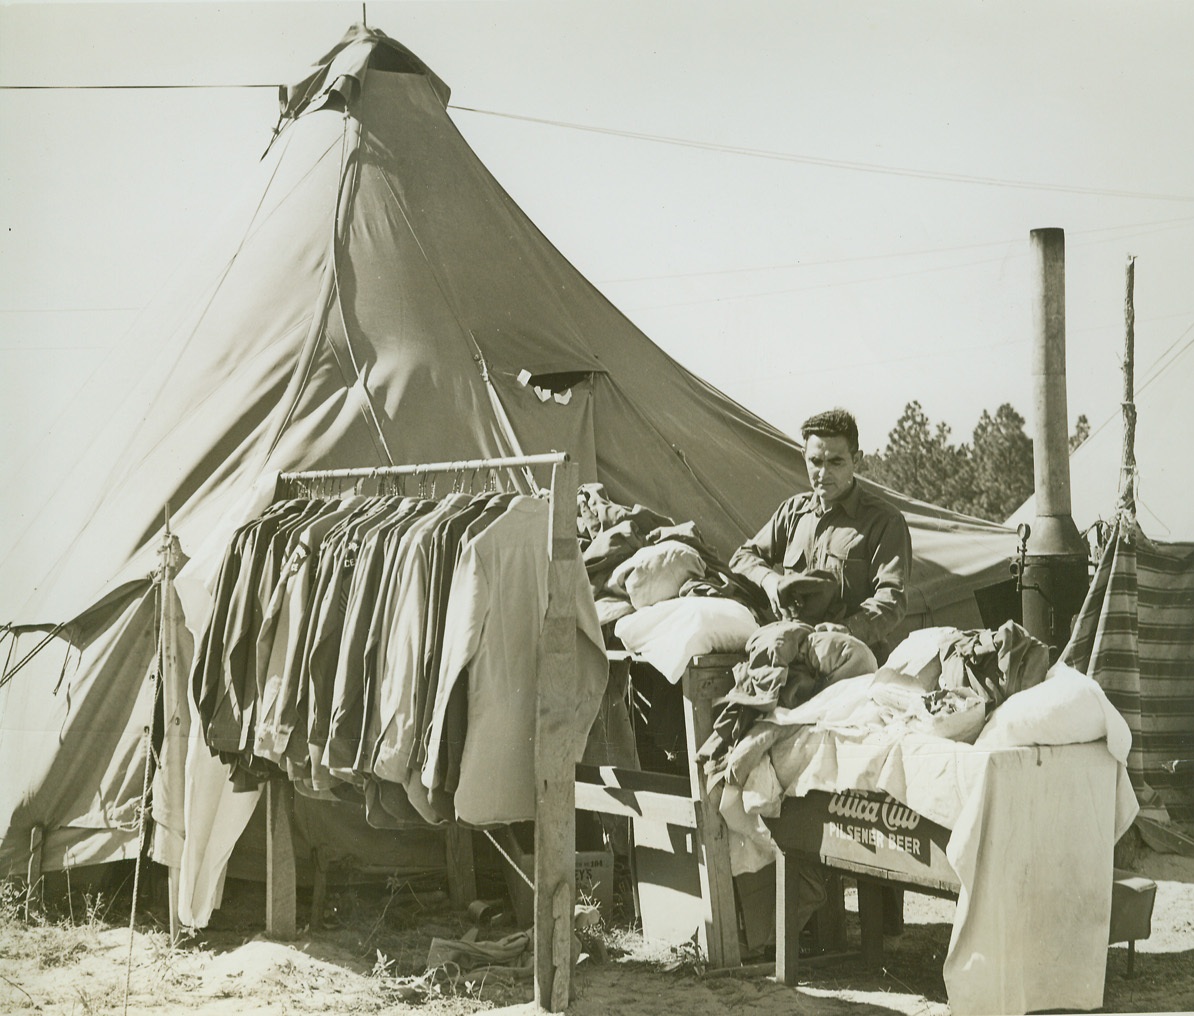 FIELD TAILOR SHOP, 10/26/1942. MANESS, N.C. – Irving Levinson of New York, who has just put out a rack of freshly pressed uniforms for special troops of the 26th Division, goes to work assorting a new batch of laundry and uniforms. A civilian tailor, Levinson’s shop is now a tent in the camp area. In background right is the kerosene fired steam boiler for pressing. Credit: OWI Radiophoto from ACME;